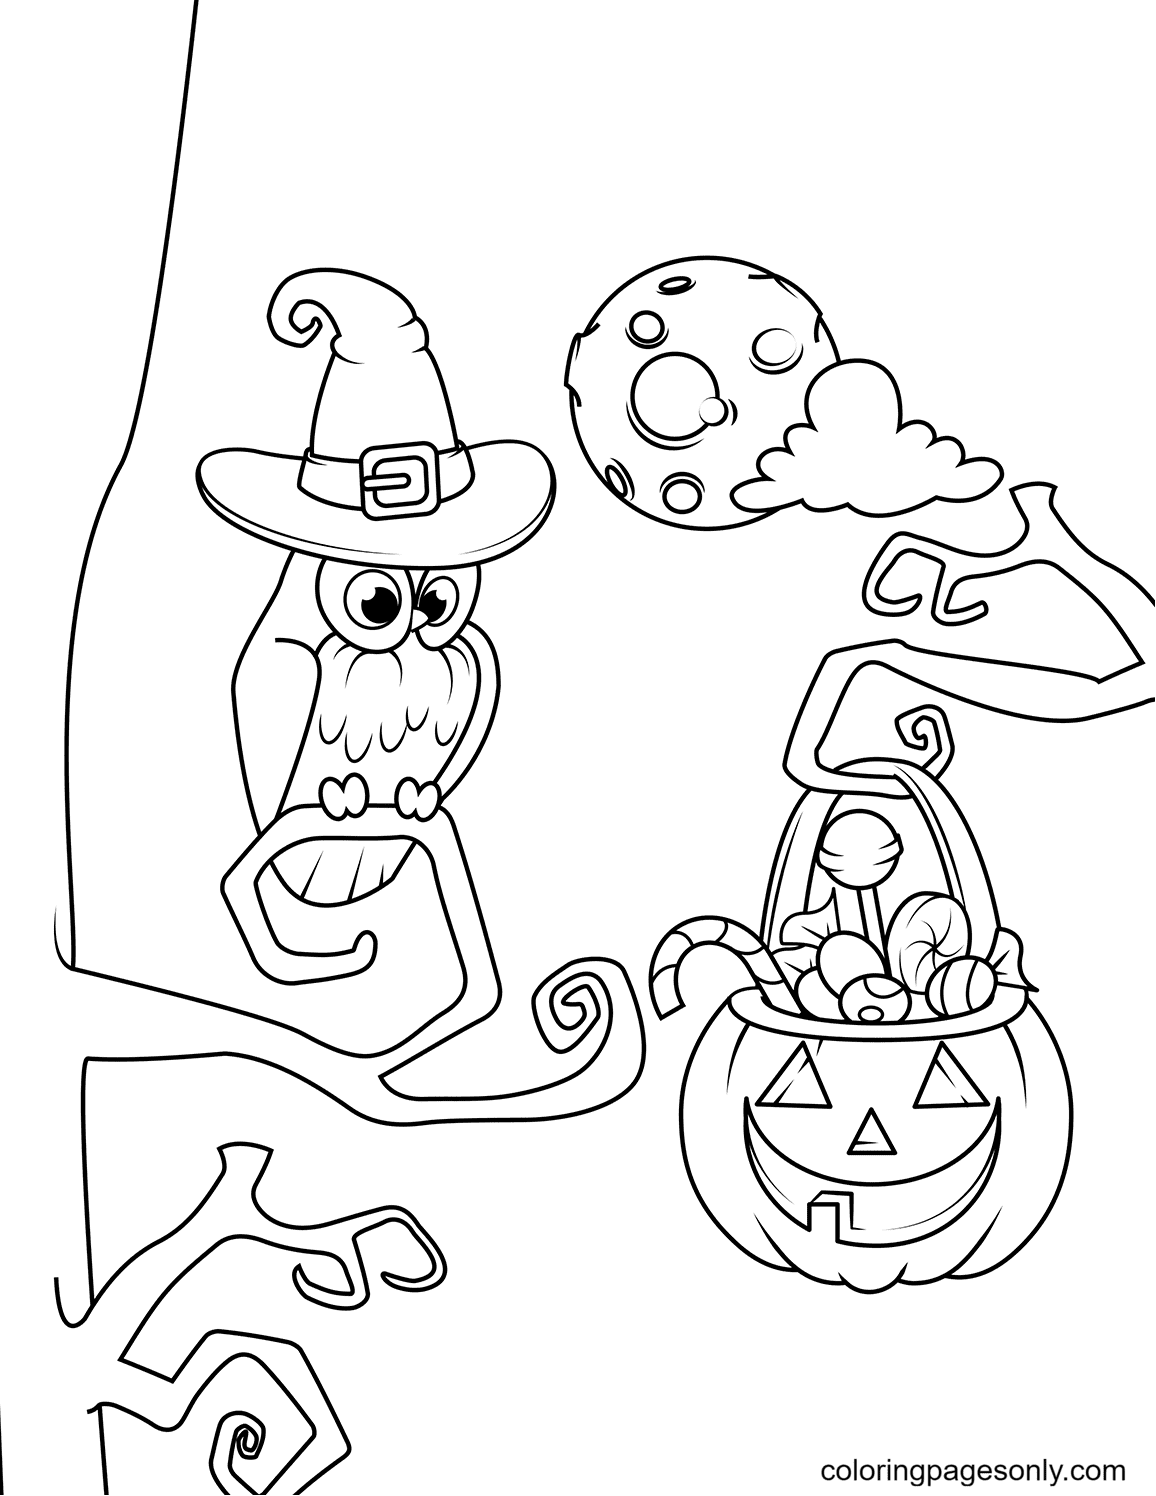 Owl and Jack O Lantern with Candies Halloween Coloring Page